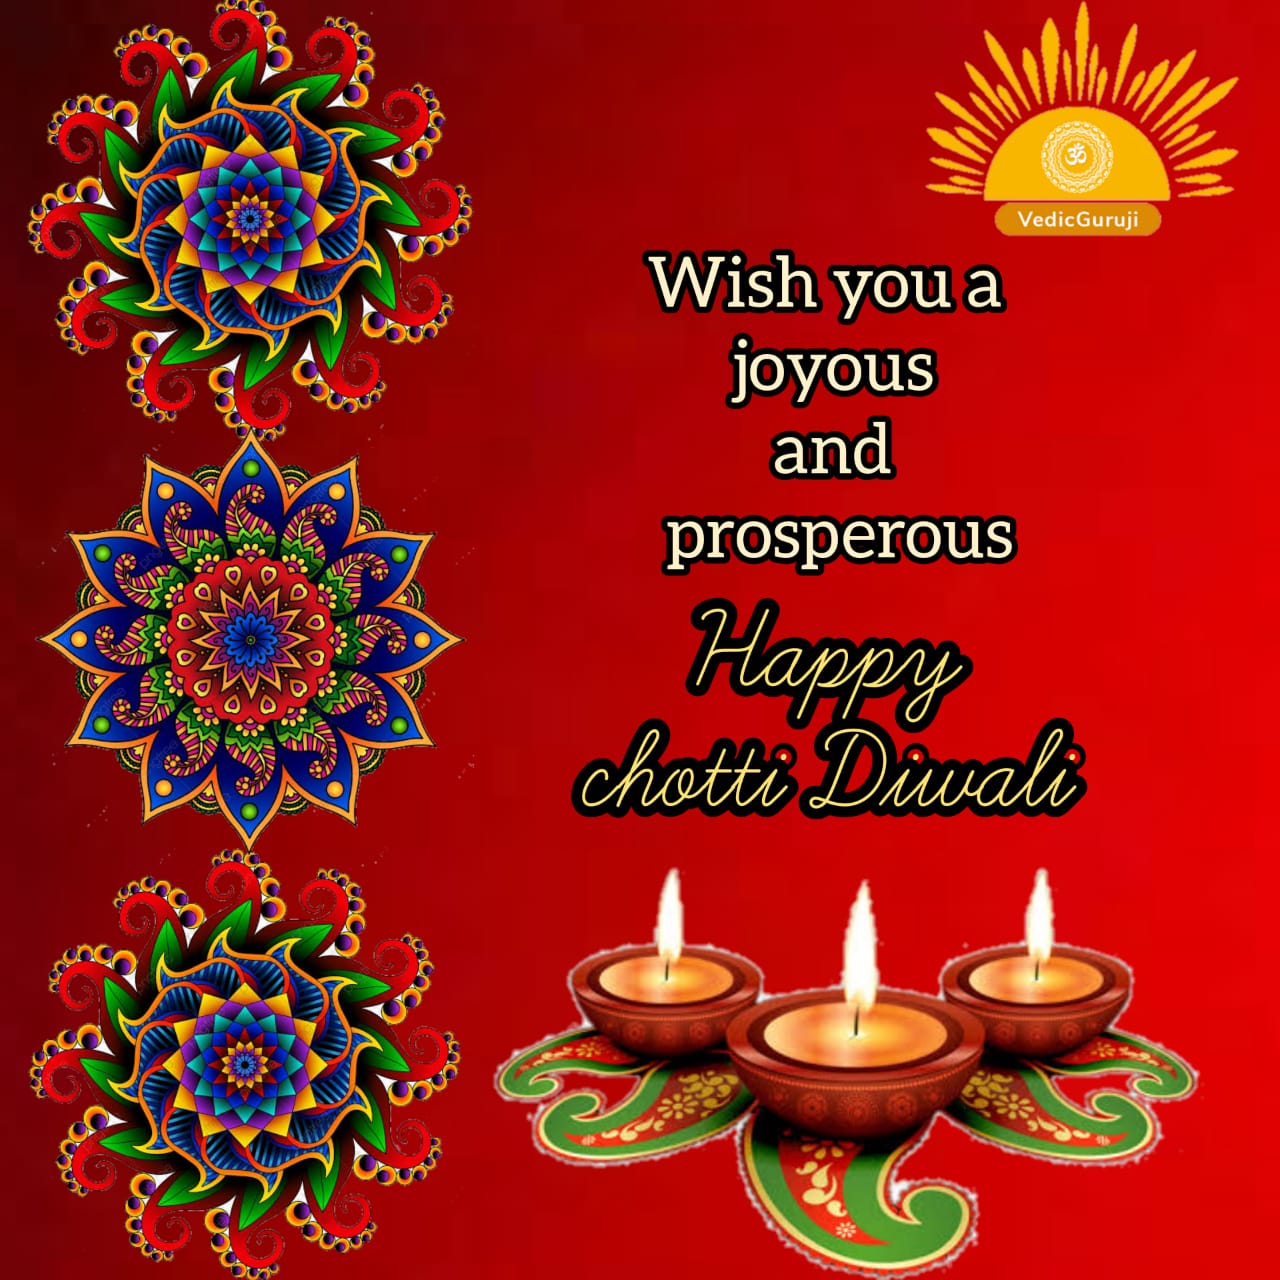 The second day of Diwali celebrations is popularly known as Choti